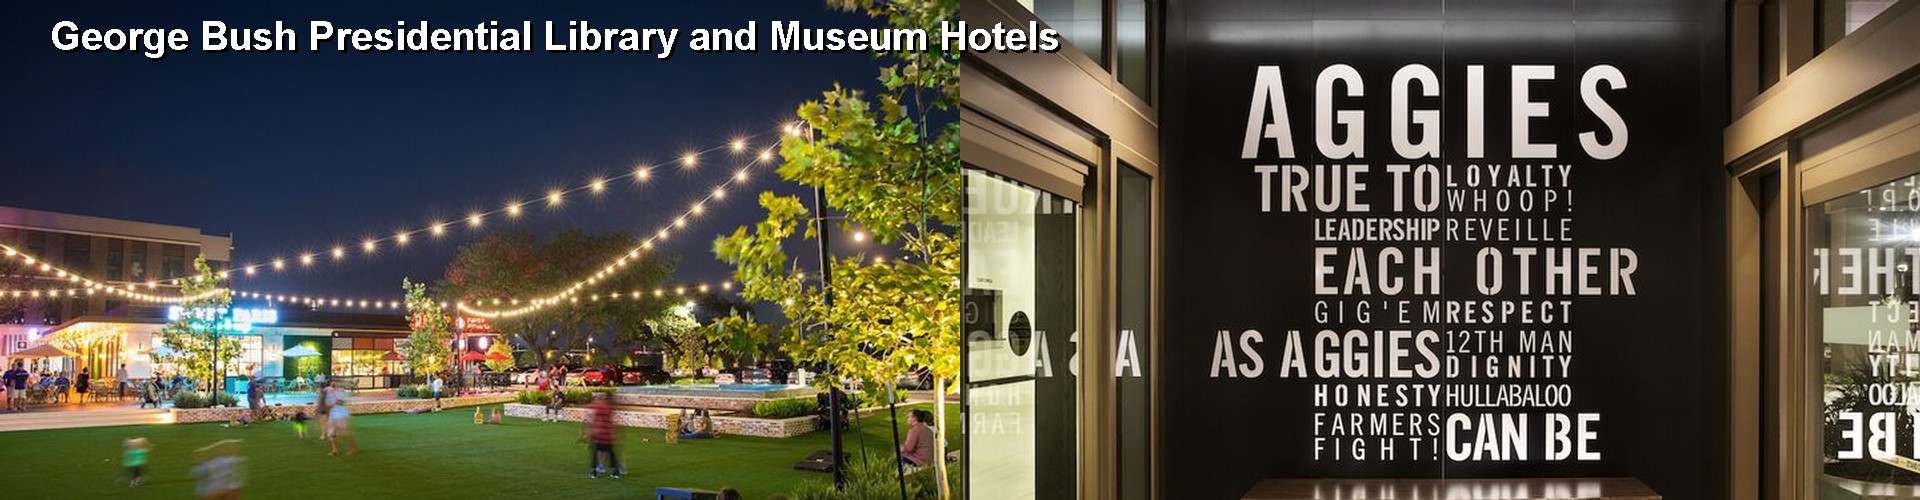 4 Best Hotels near George Bush Presidential Library and Museum